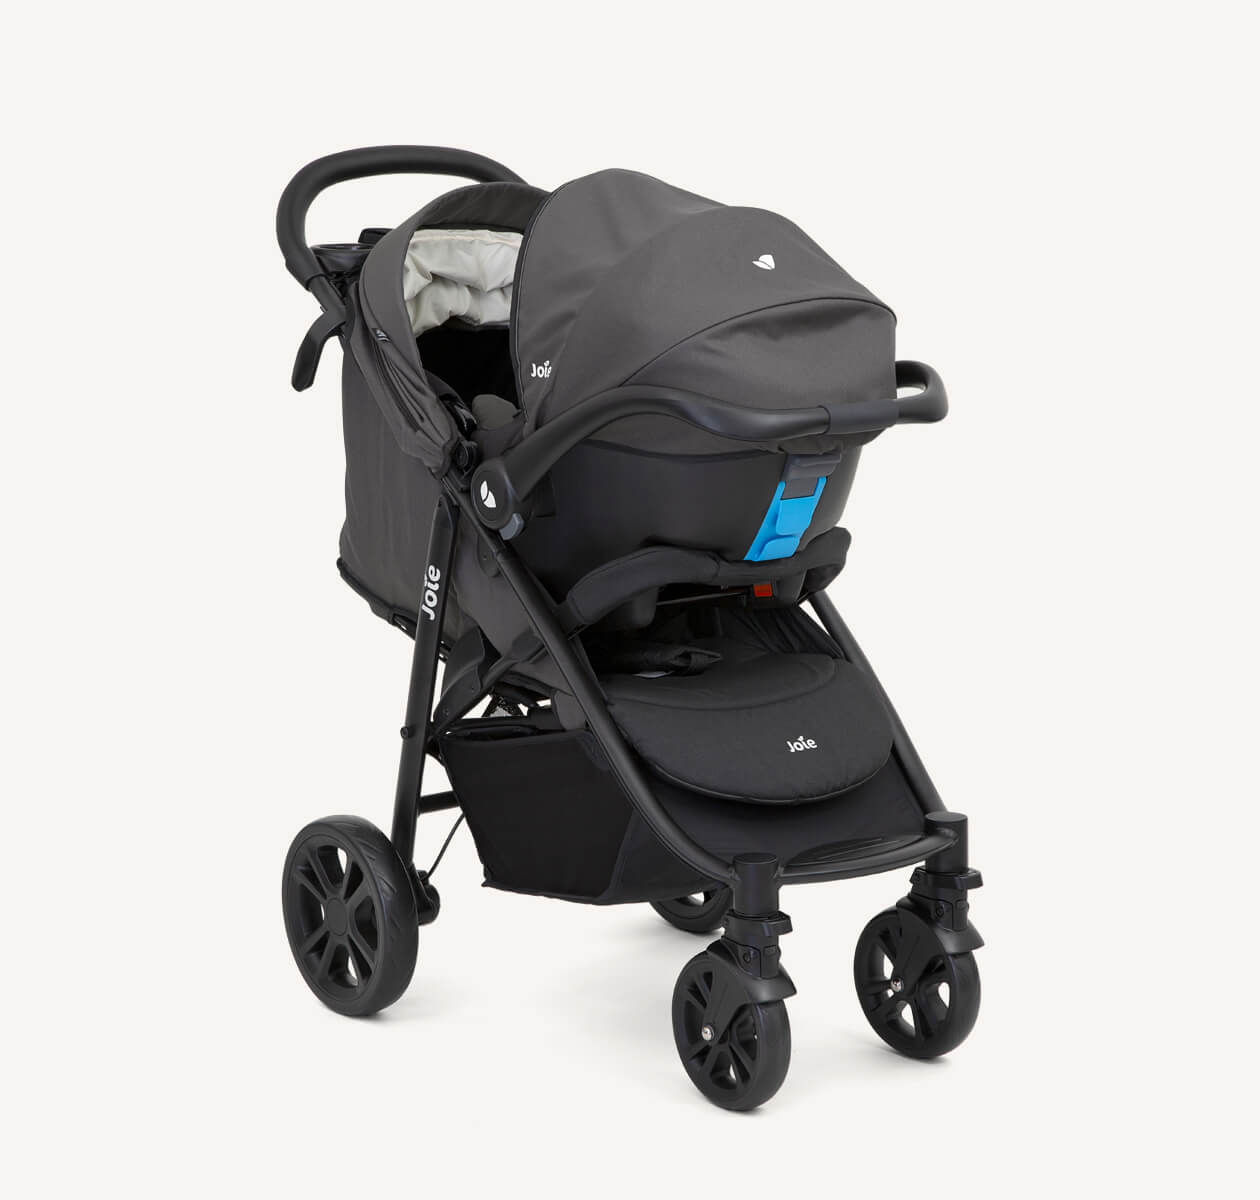 A black Joie Litetrax 4 travel system with the infant car seat attached to the stroller, facing toward the right at an angle.